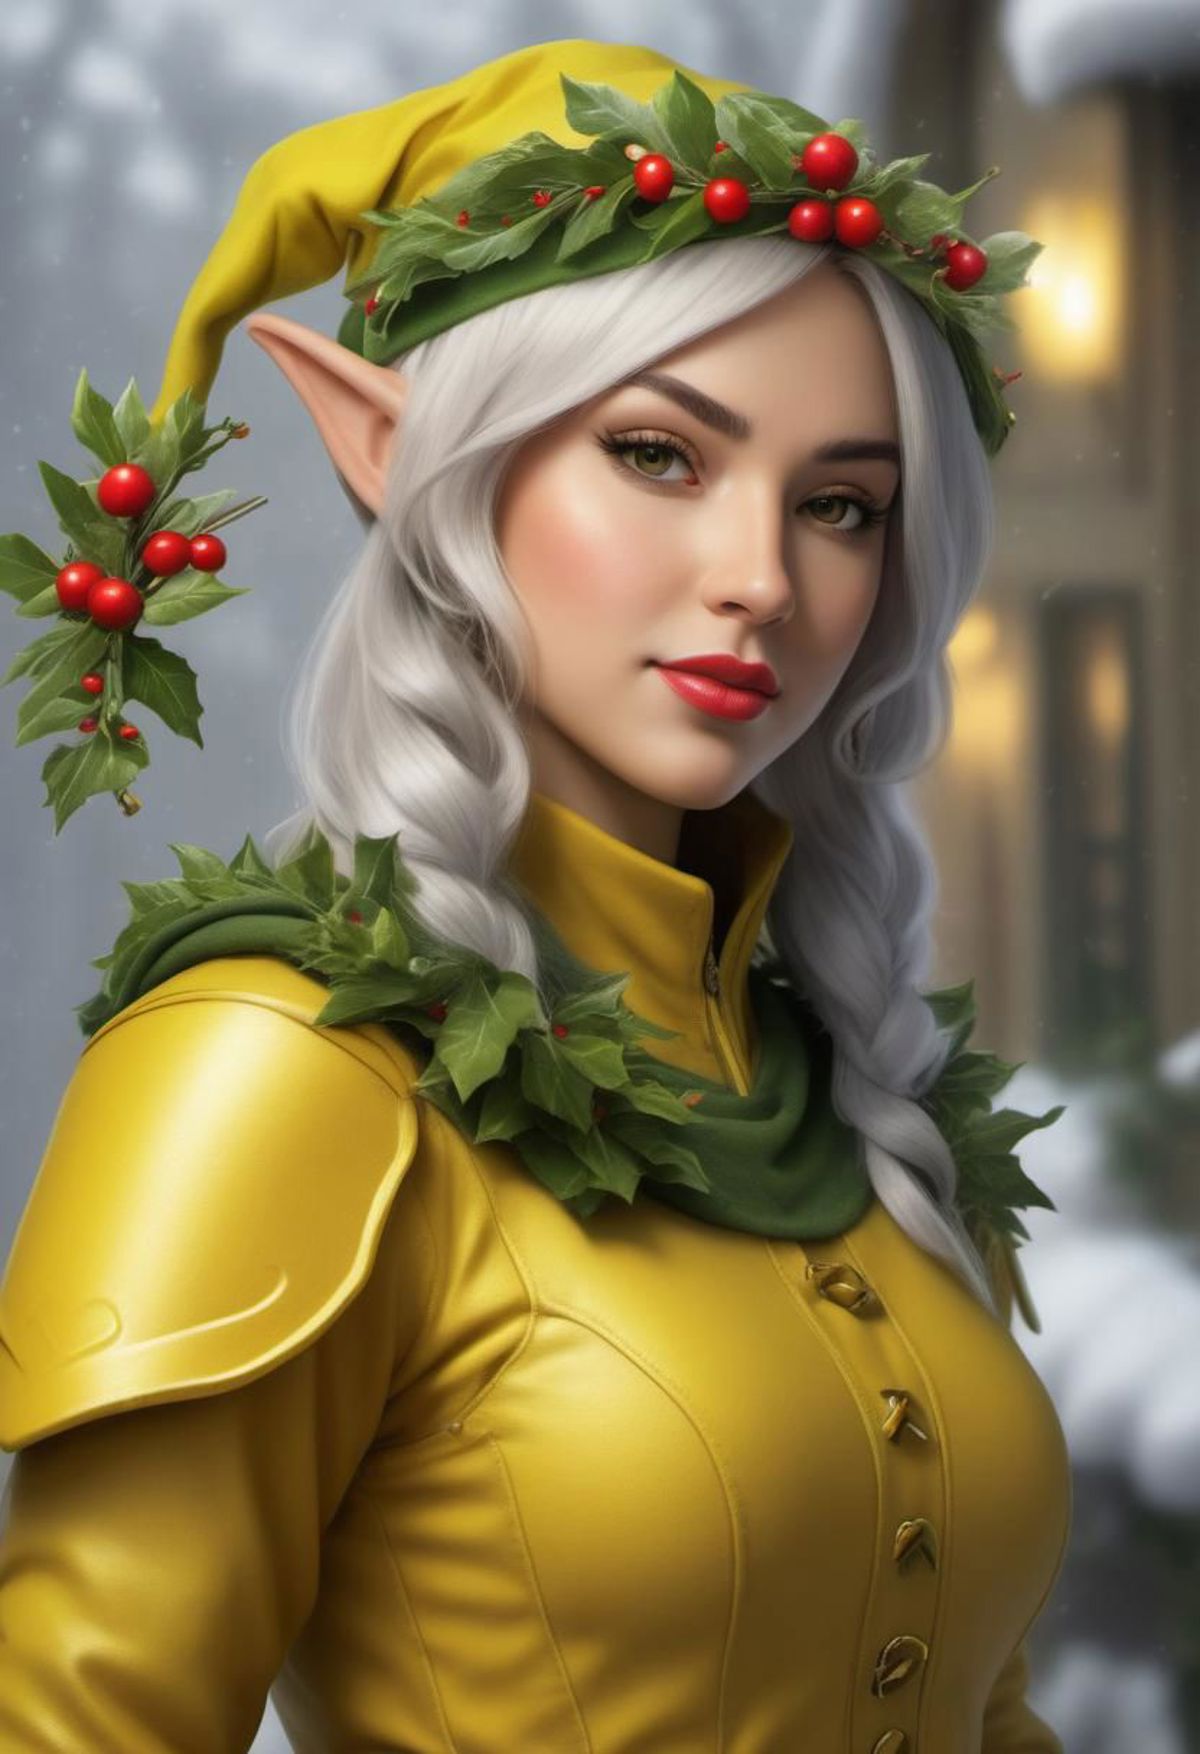 A digital illustration of a woman in a yellow shirt wearing a green hat and a necklace of berries, with a green outfit.